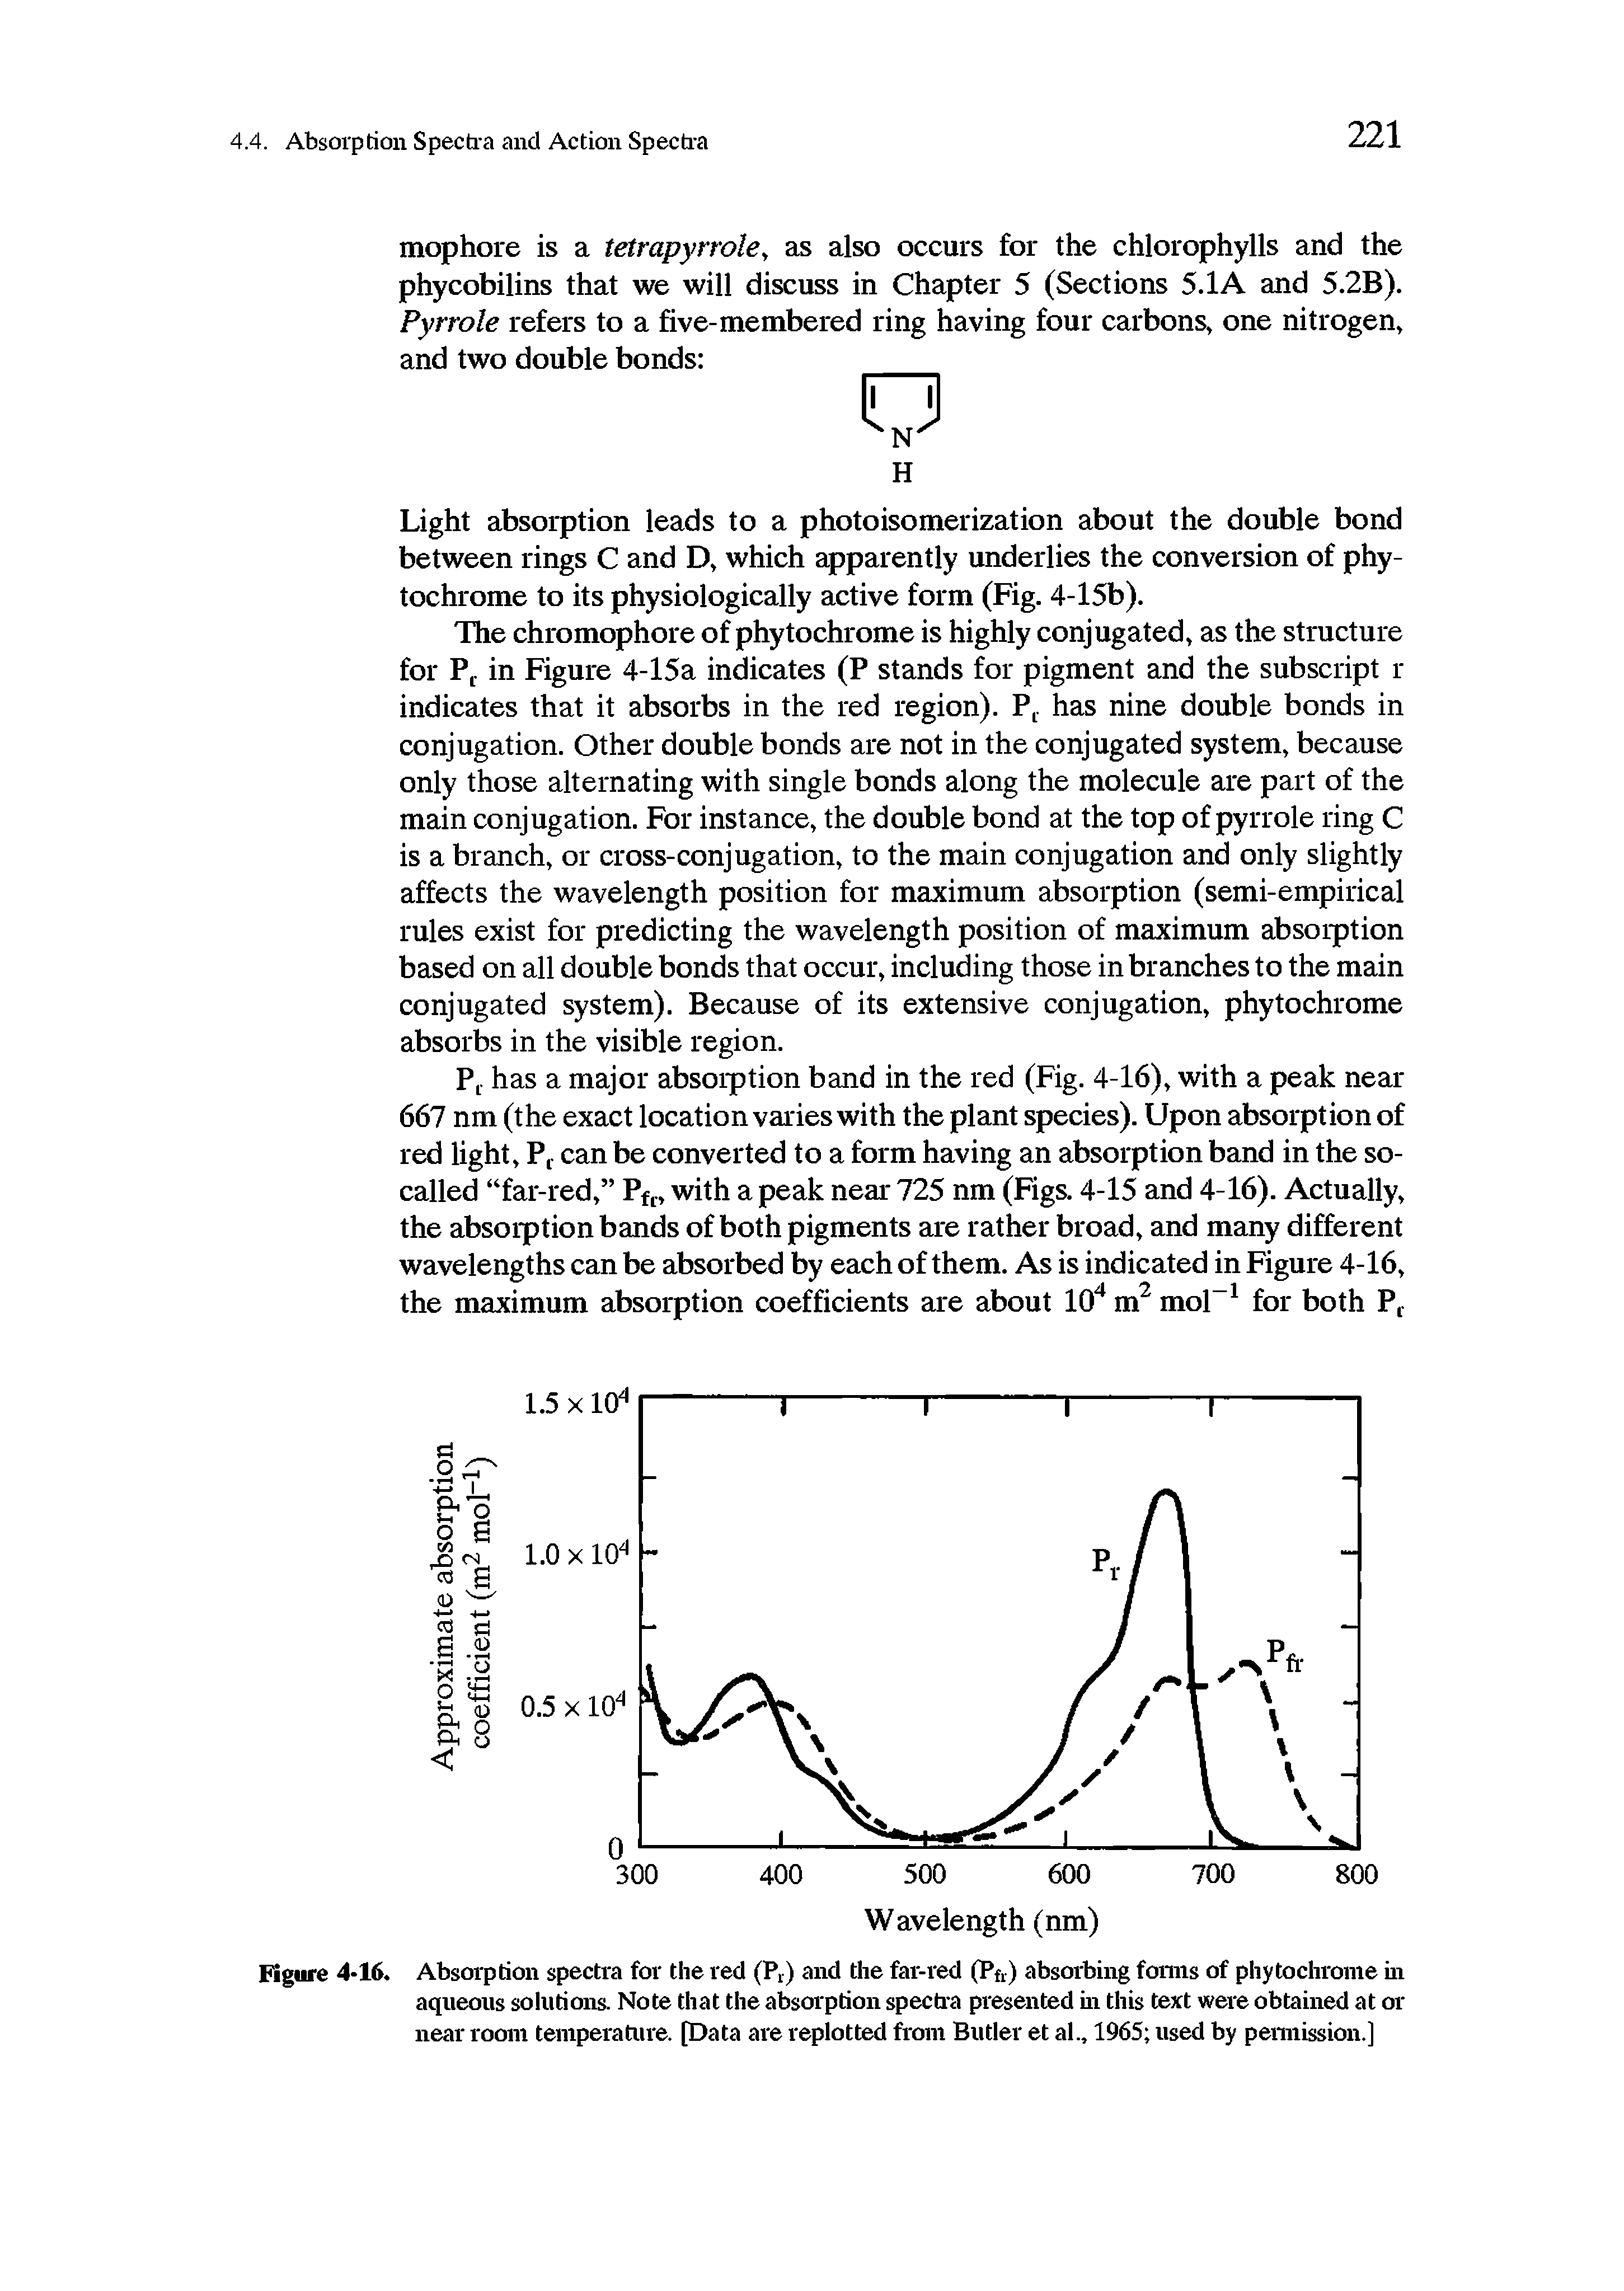 Figure 4-16. Absorption spectra for the red (Pr) and the far-red (Pfr) absorbing forms of phytochrome in aqueous solutions. Note that the absorption spectra presented in this text were obtained at or near room temperature. [Data are replotted from Butler et al., 1965 used by permission.]...